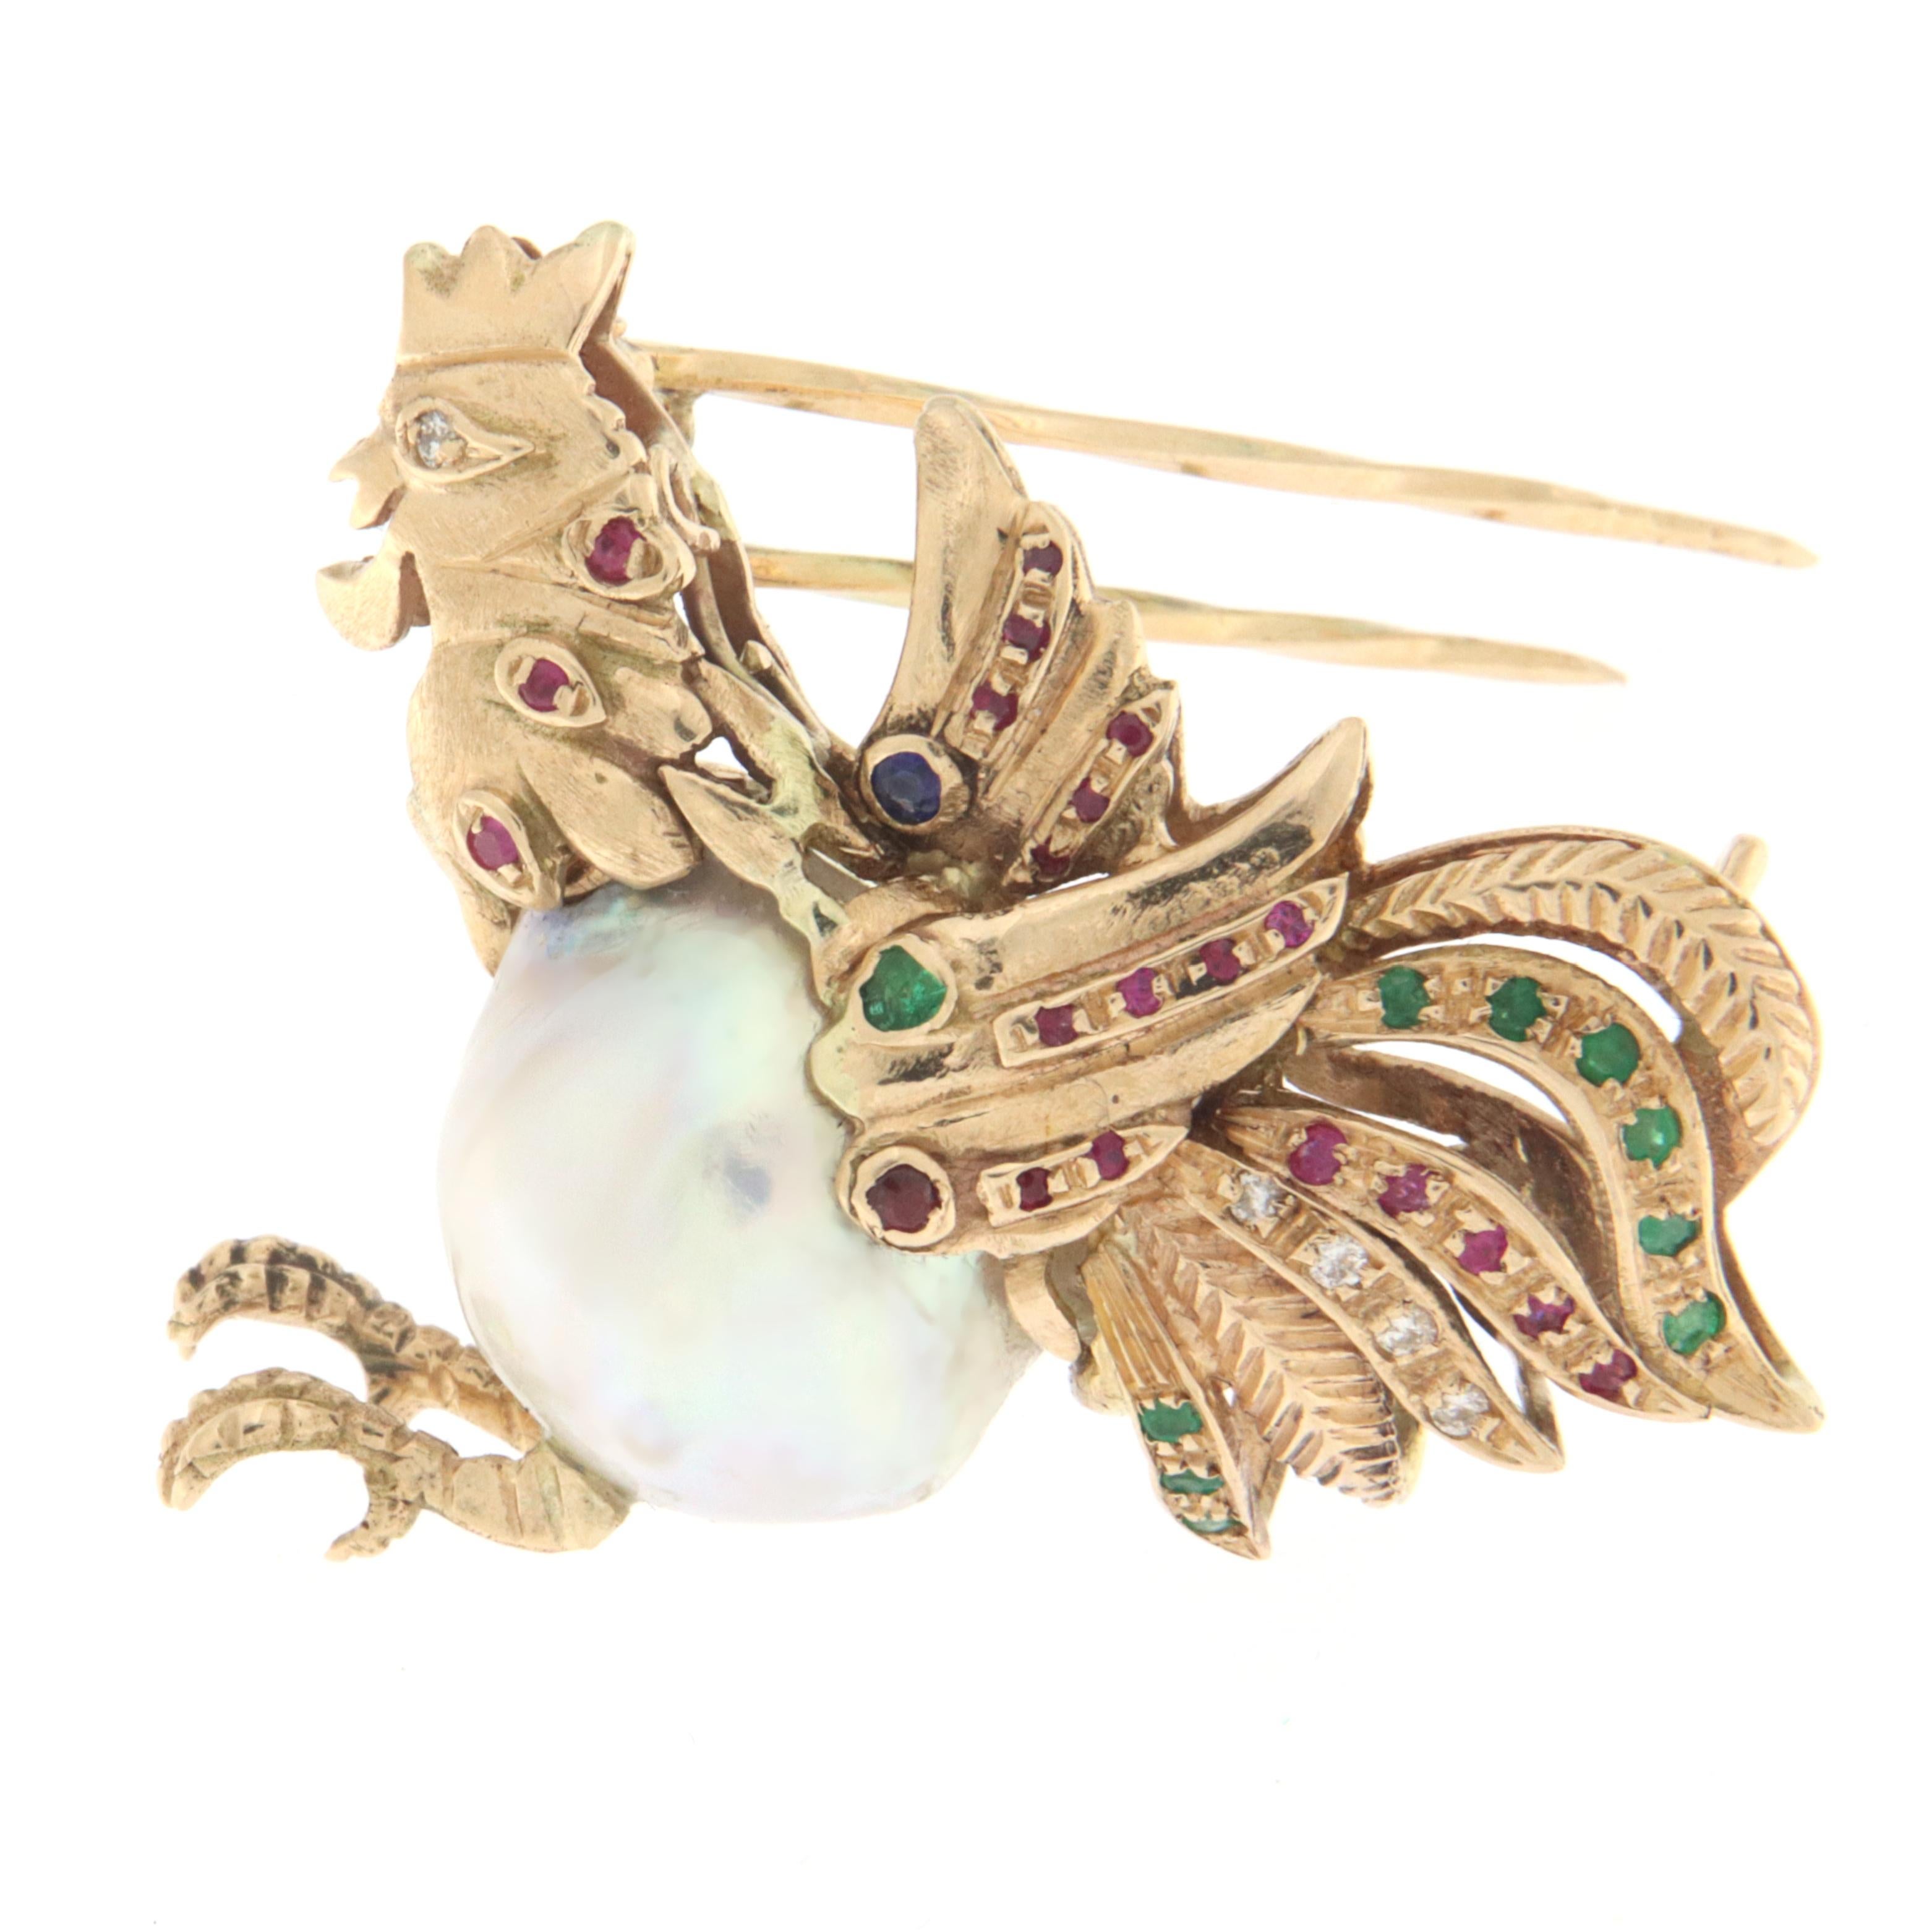 Brilliant Cut Rooster Emeralds Rubies Diamonds Pearl 14 Karat Yellow Gold Brooch For Sale